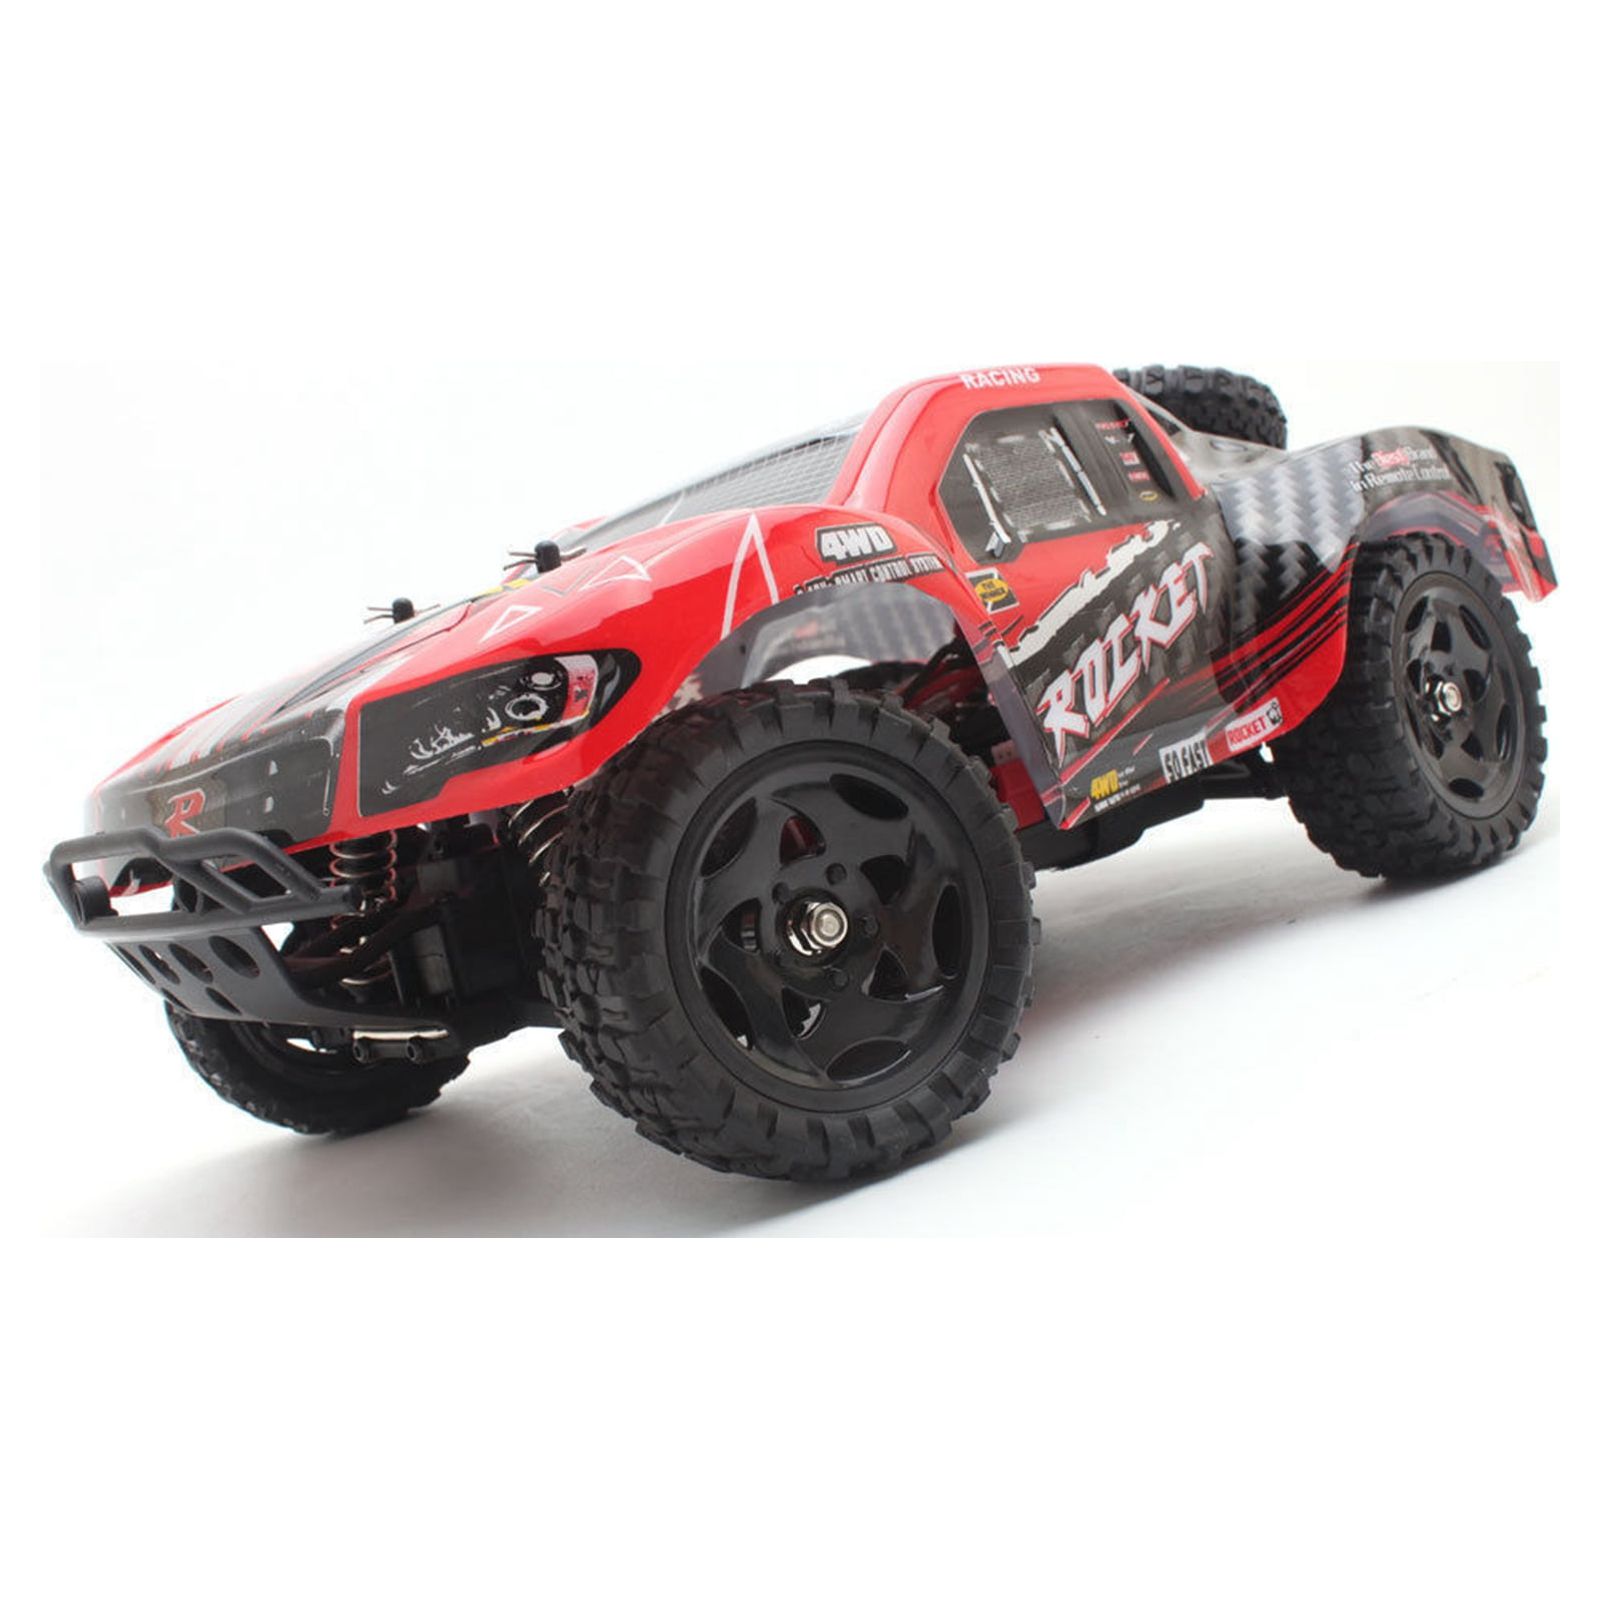 REMO 1621 2.4G 4WD 1/16 50km/h RC Truck Car Waterproof Brushed Short Course - image 4 of 7